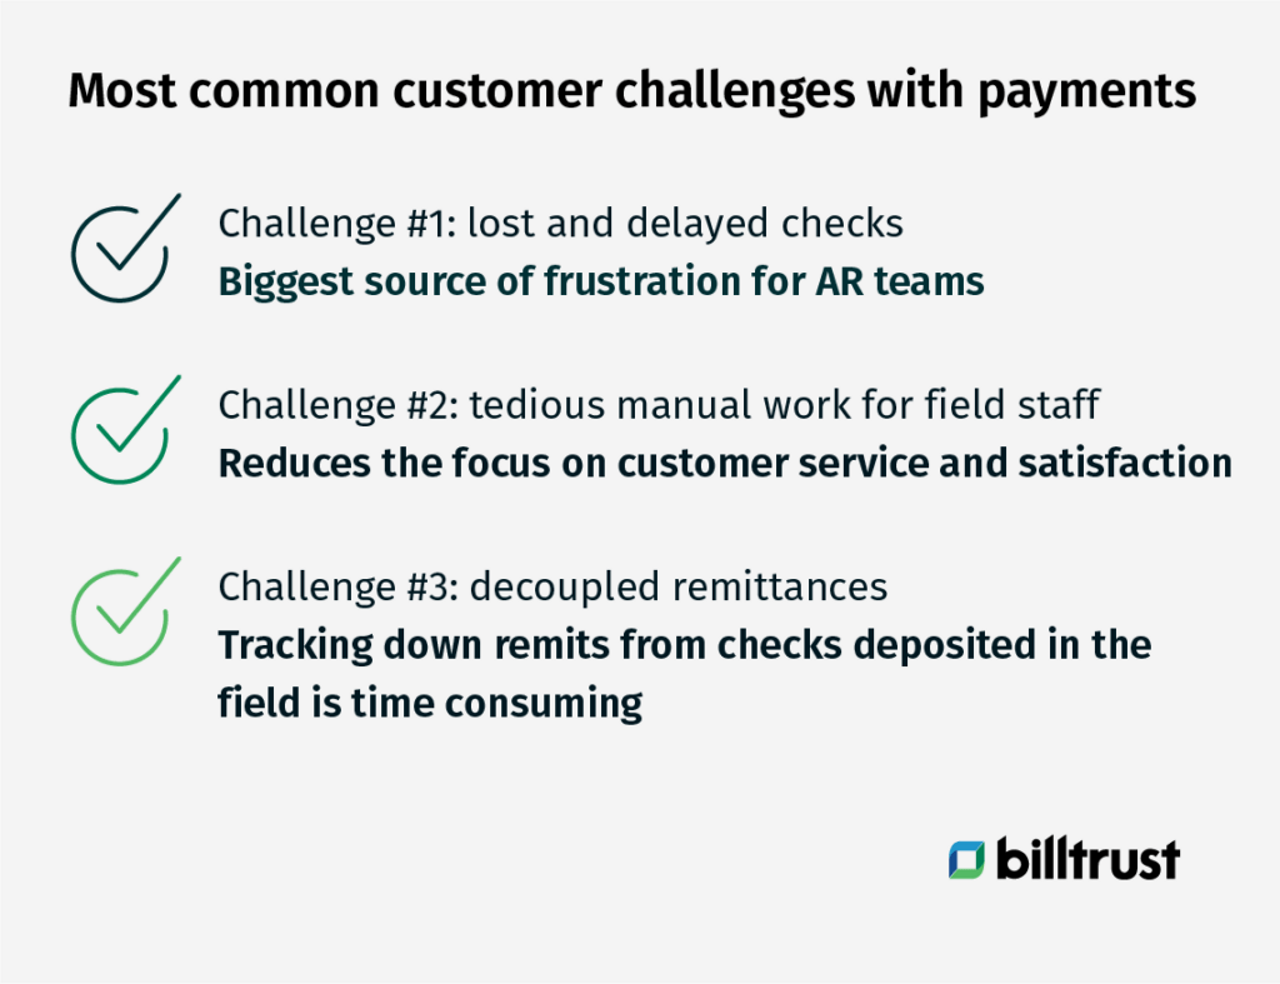 remote deposits and three common challenges with payments